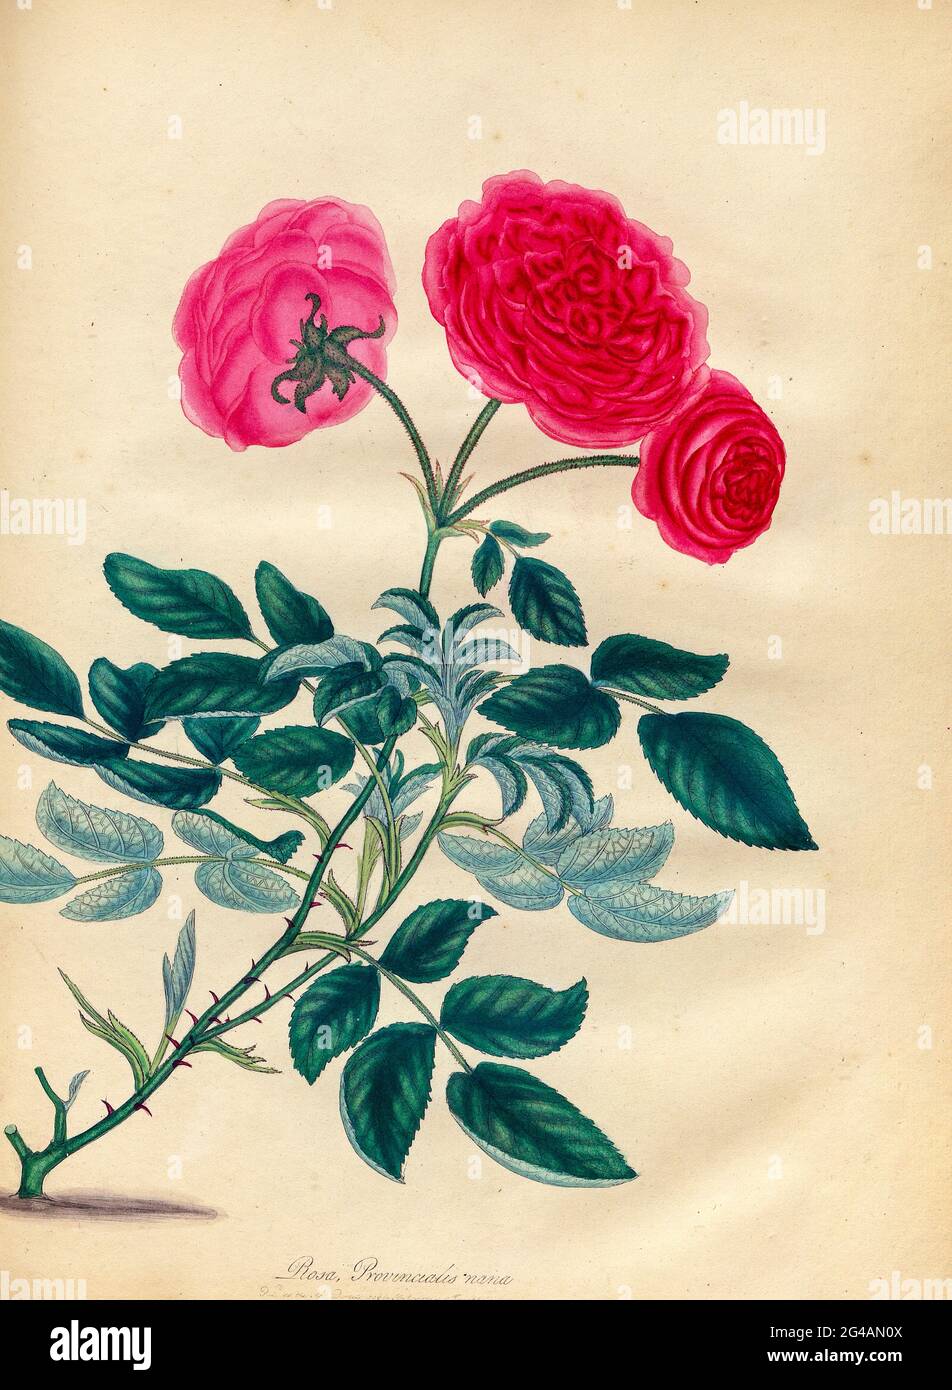 ROSA Provincialis, nana. Dwarf Province Rose From the book Roses, or, A monograph of the genus Rosa : containing coloured figures of all the known species and beautiful varieties, drawn, engraved, described, and coloured, from living plants. by Andrews, Henry Charles, Published in London : printed by R. Taylor and Co. ; 1805. Stock Photo